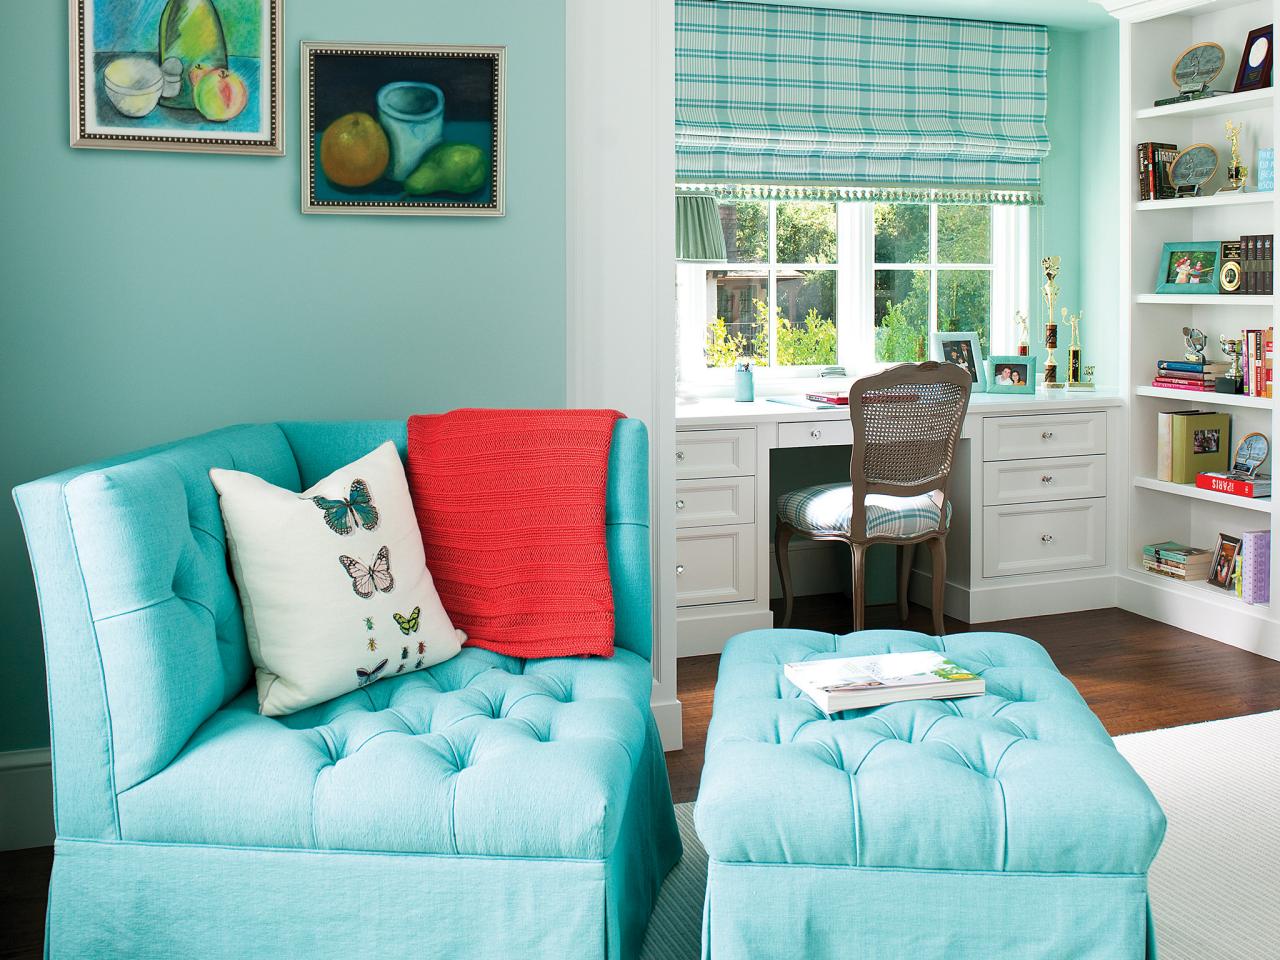 Bedroom Sitting Area With Blue Corner Chair and Ottoman HGTV